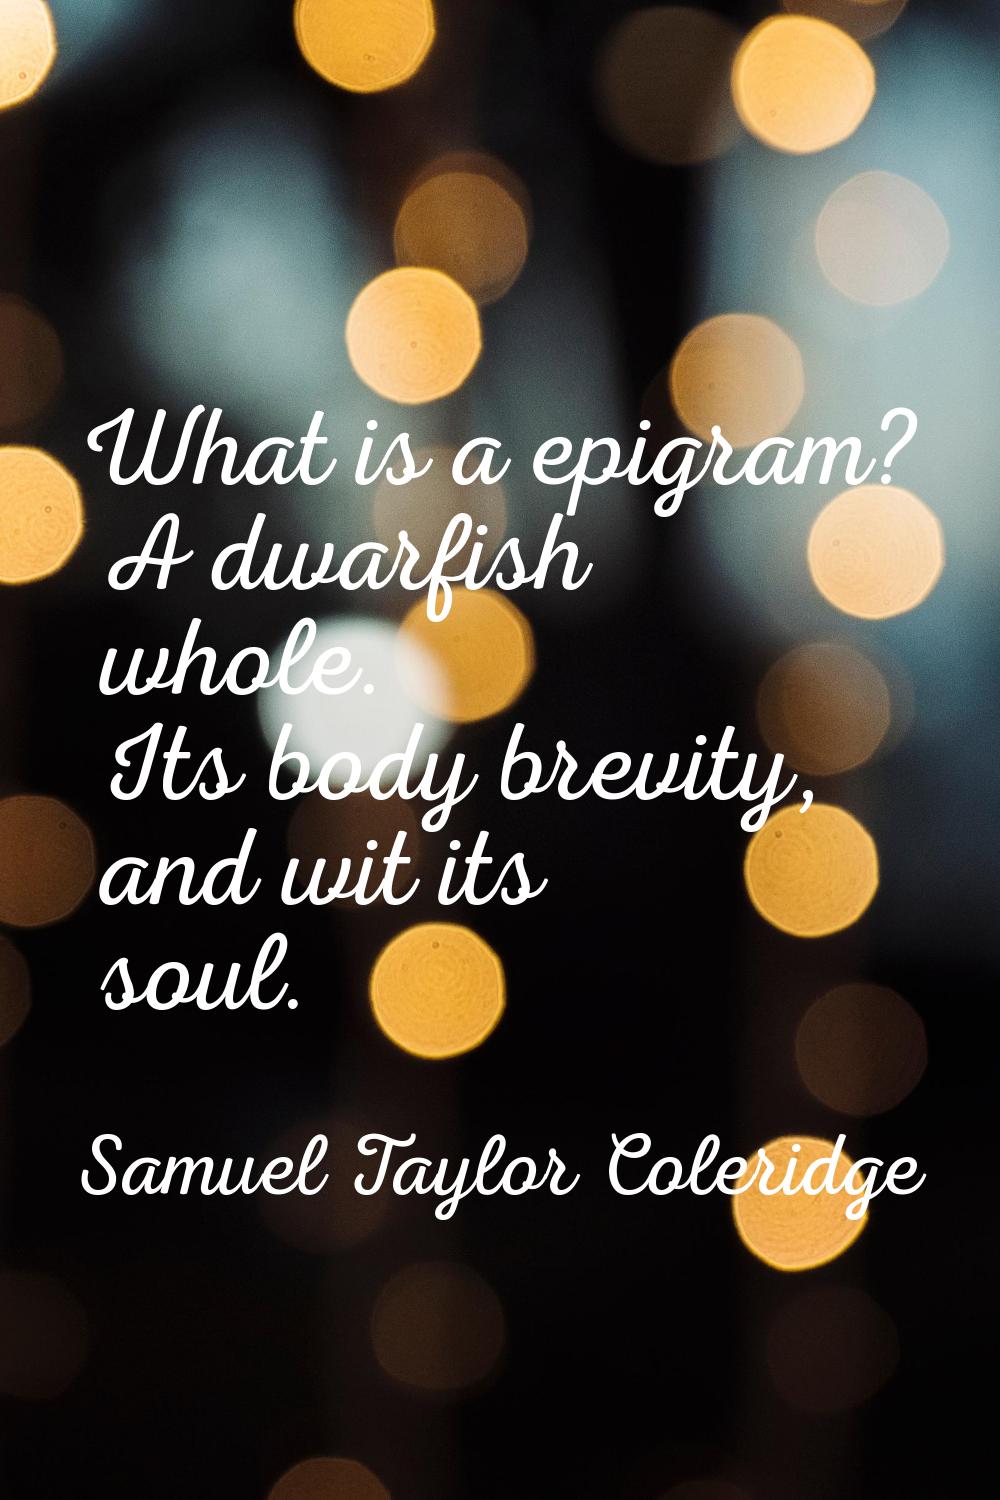 What is a epigram? A dwarfish whole. Its body brevity, and wit its soul.